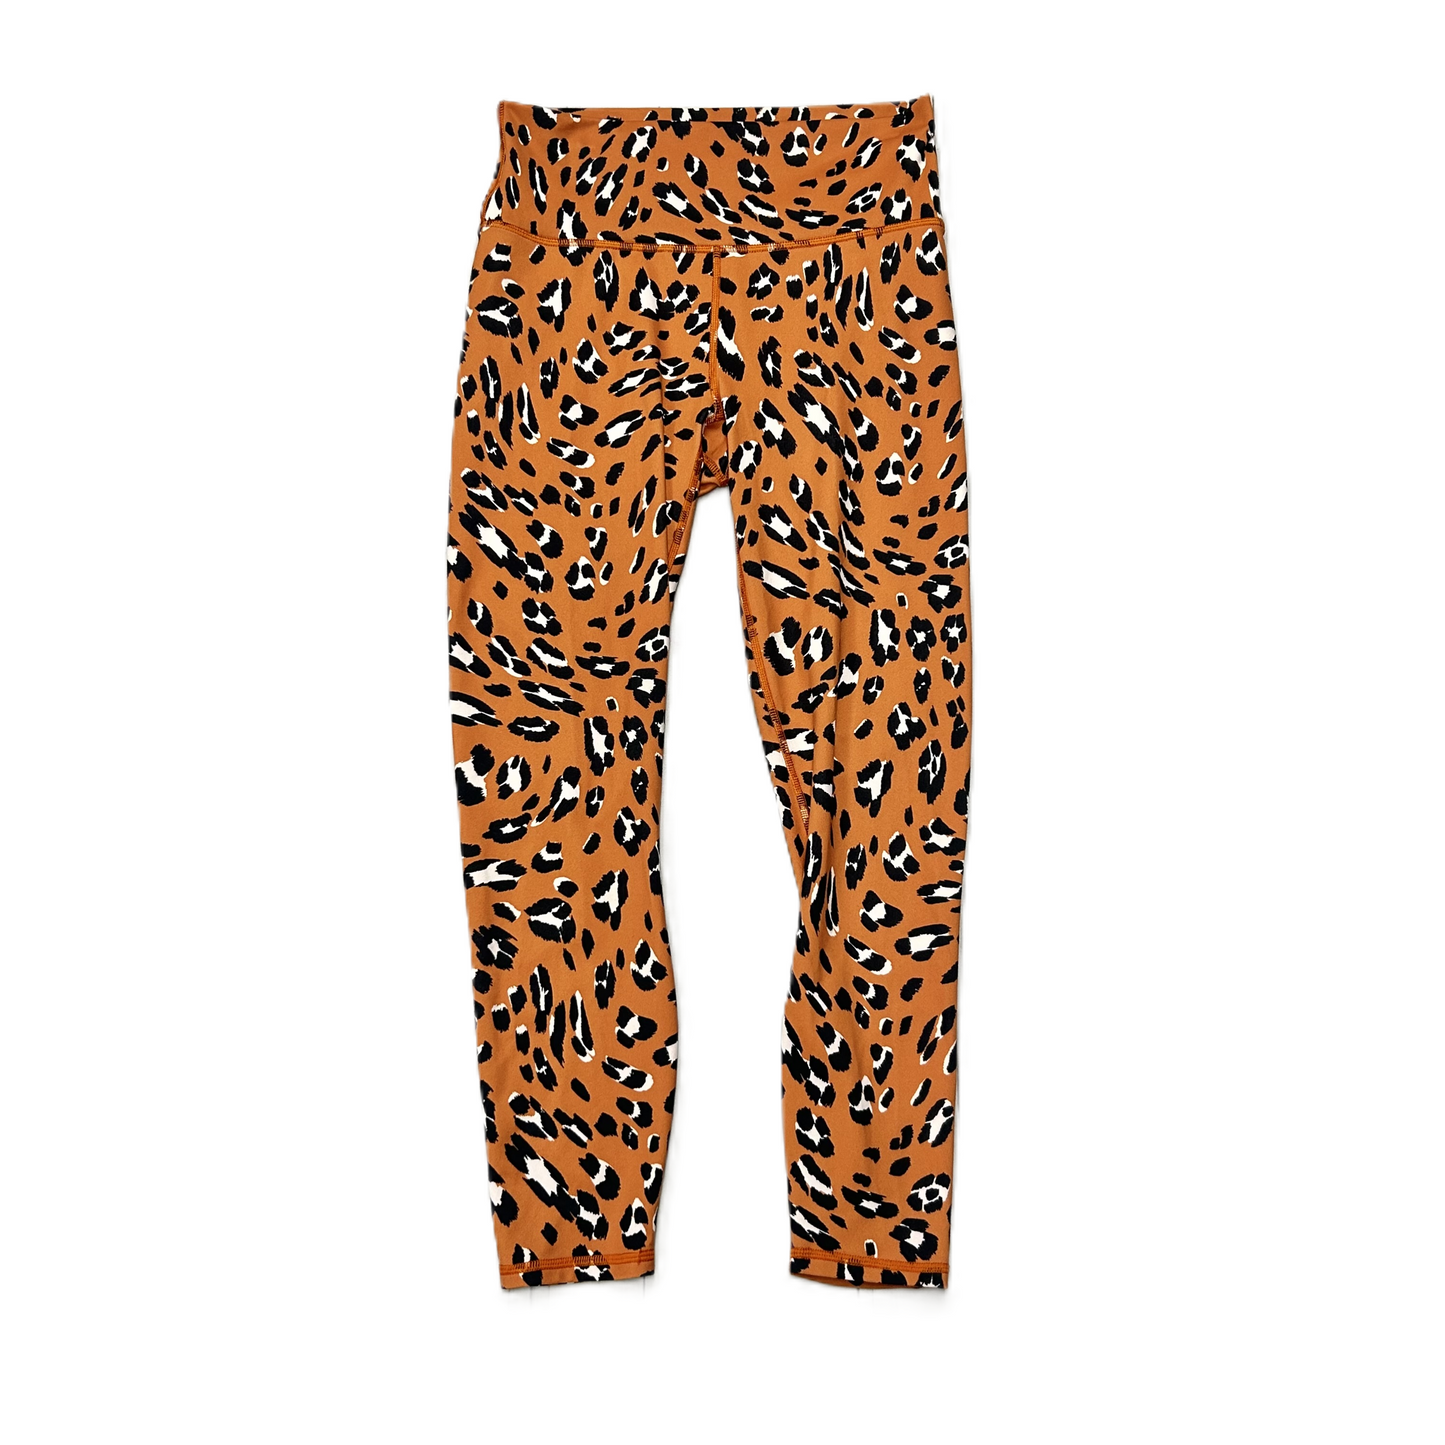 Animal Print Athletic Leggings By Fabletics, Size: S